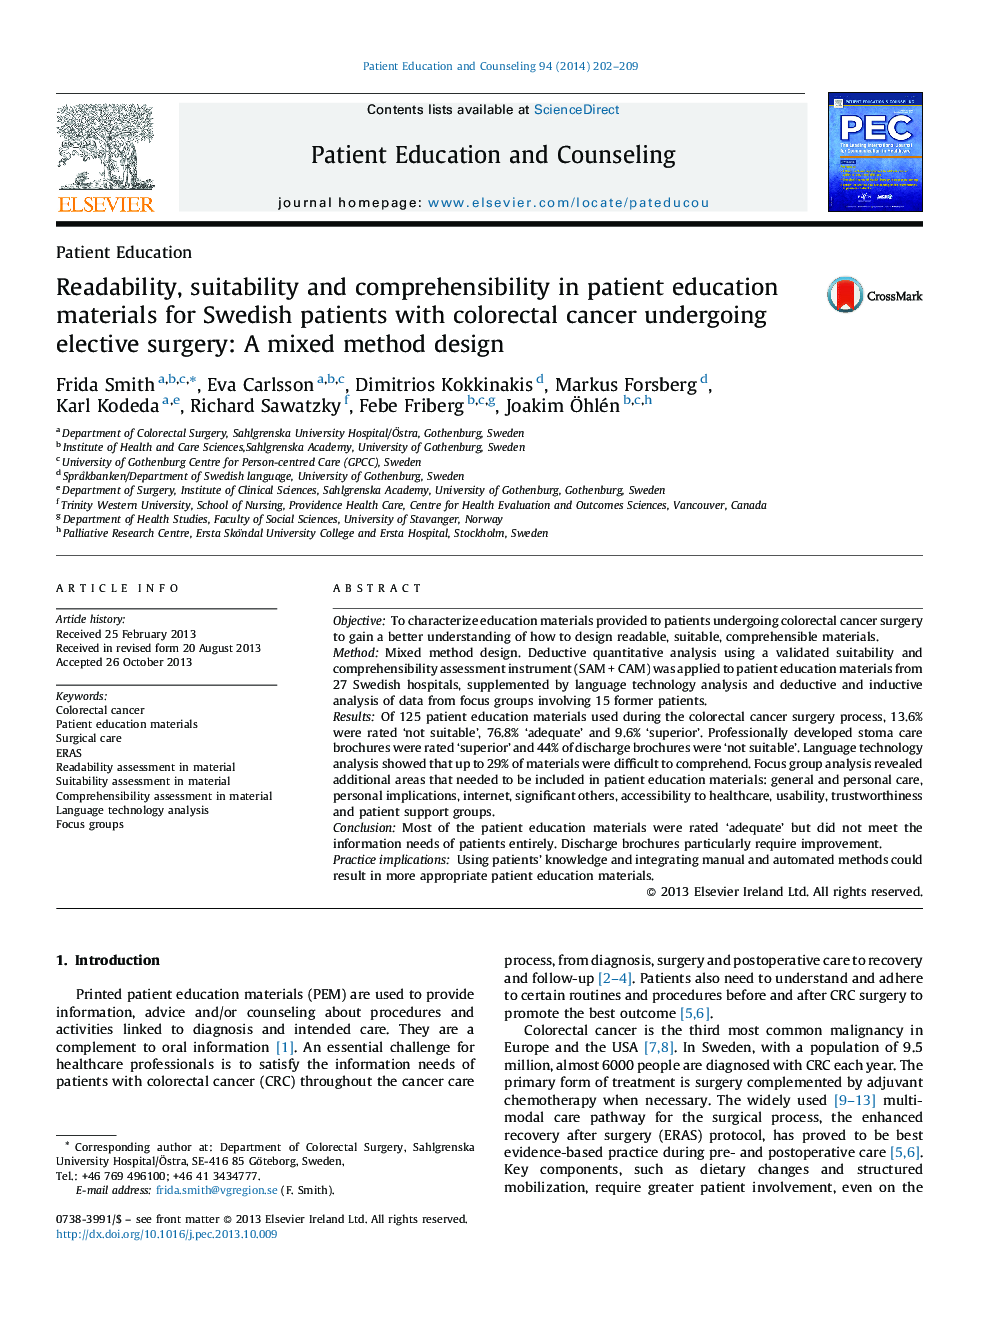 Readability, suitability and comprehensibility in patient education materials for Swedish patients with colorectal cancer undergoing elective surgery: A mixed method design